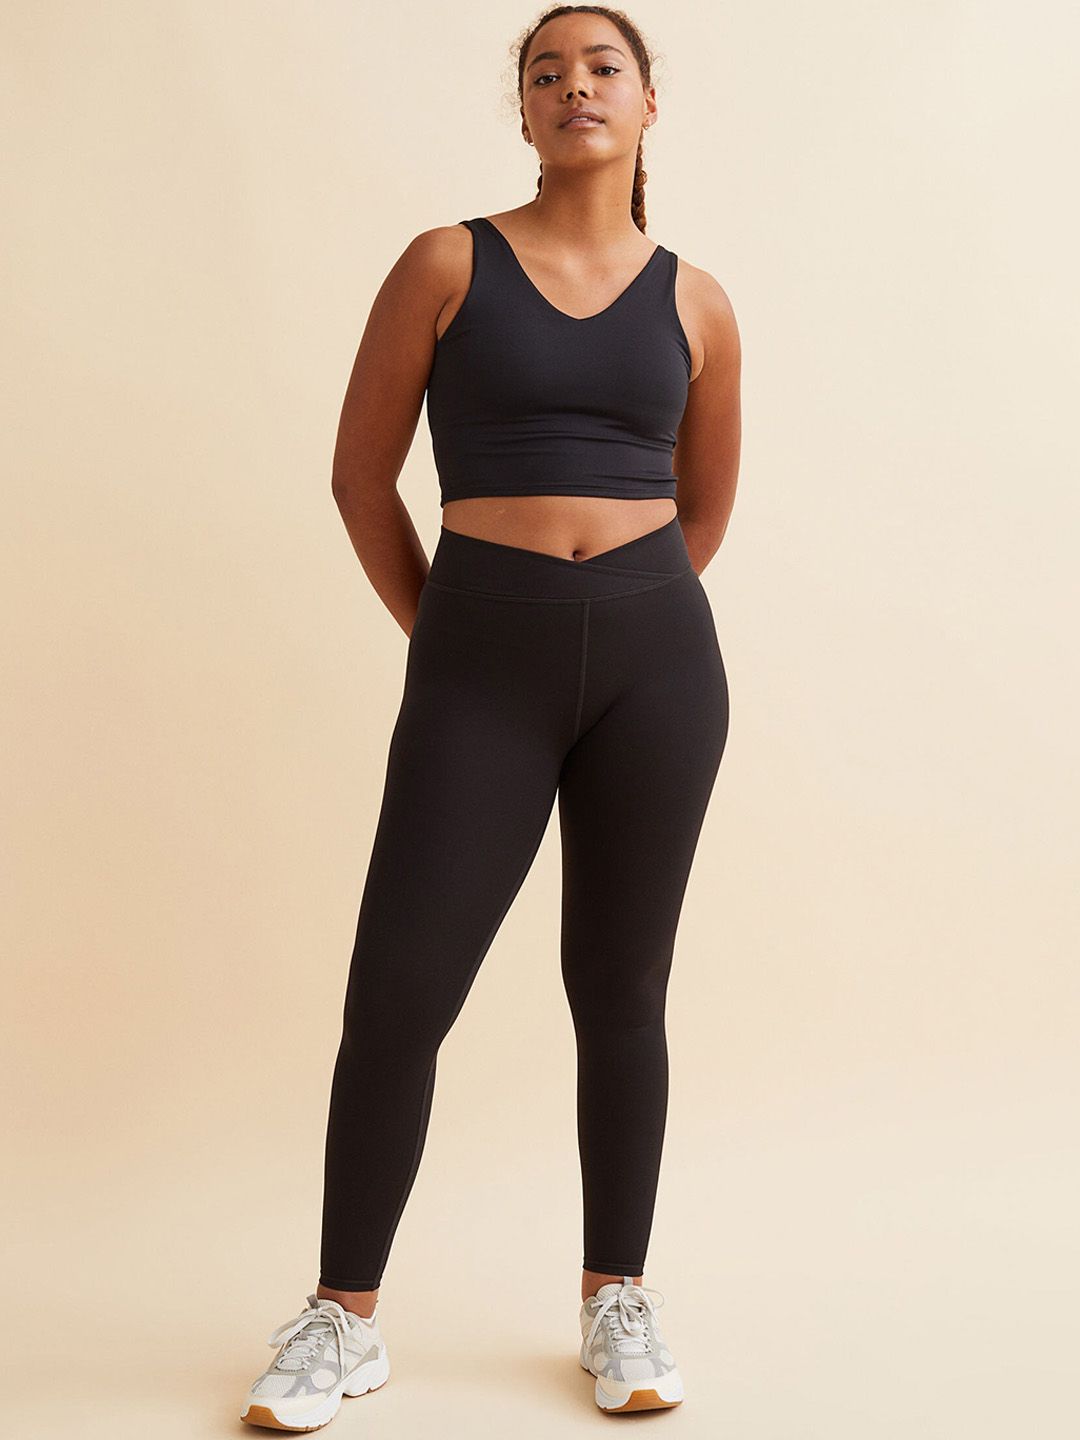 H&M Women Black Wrapover-Waist Sports Tights Price in India